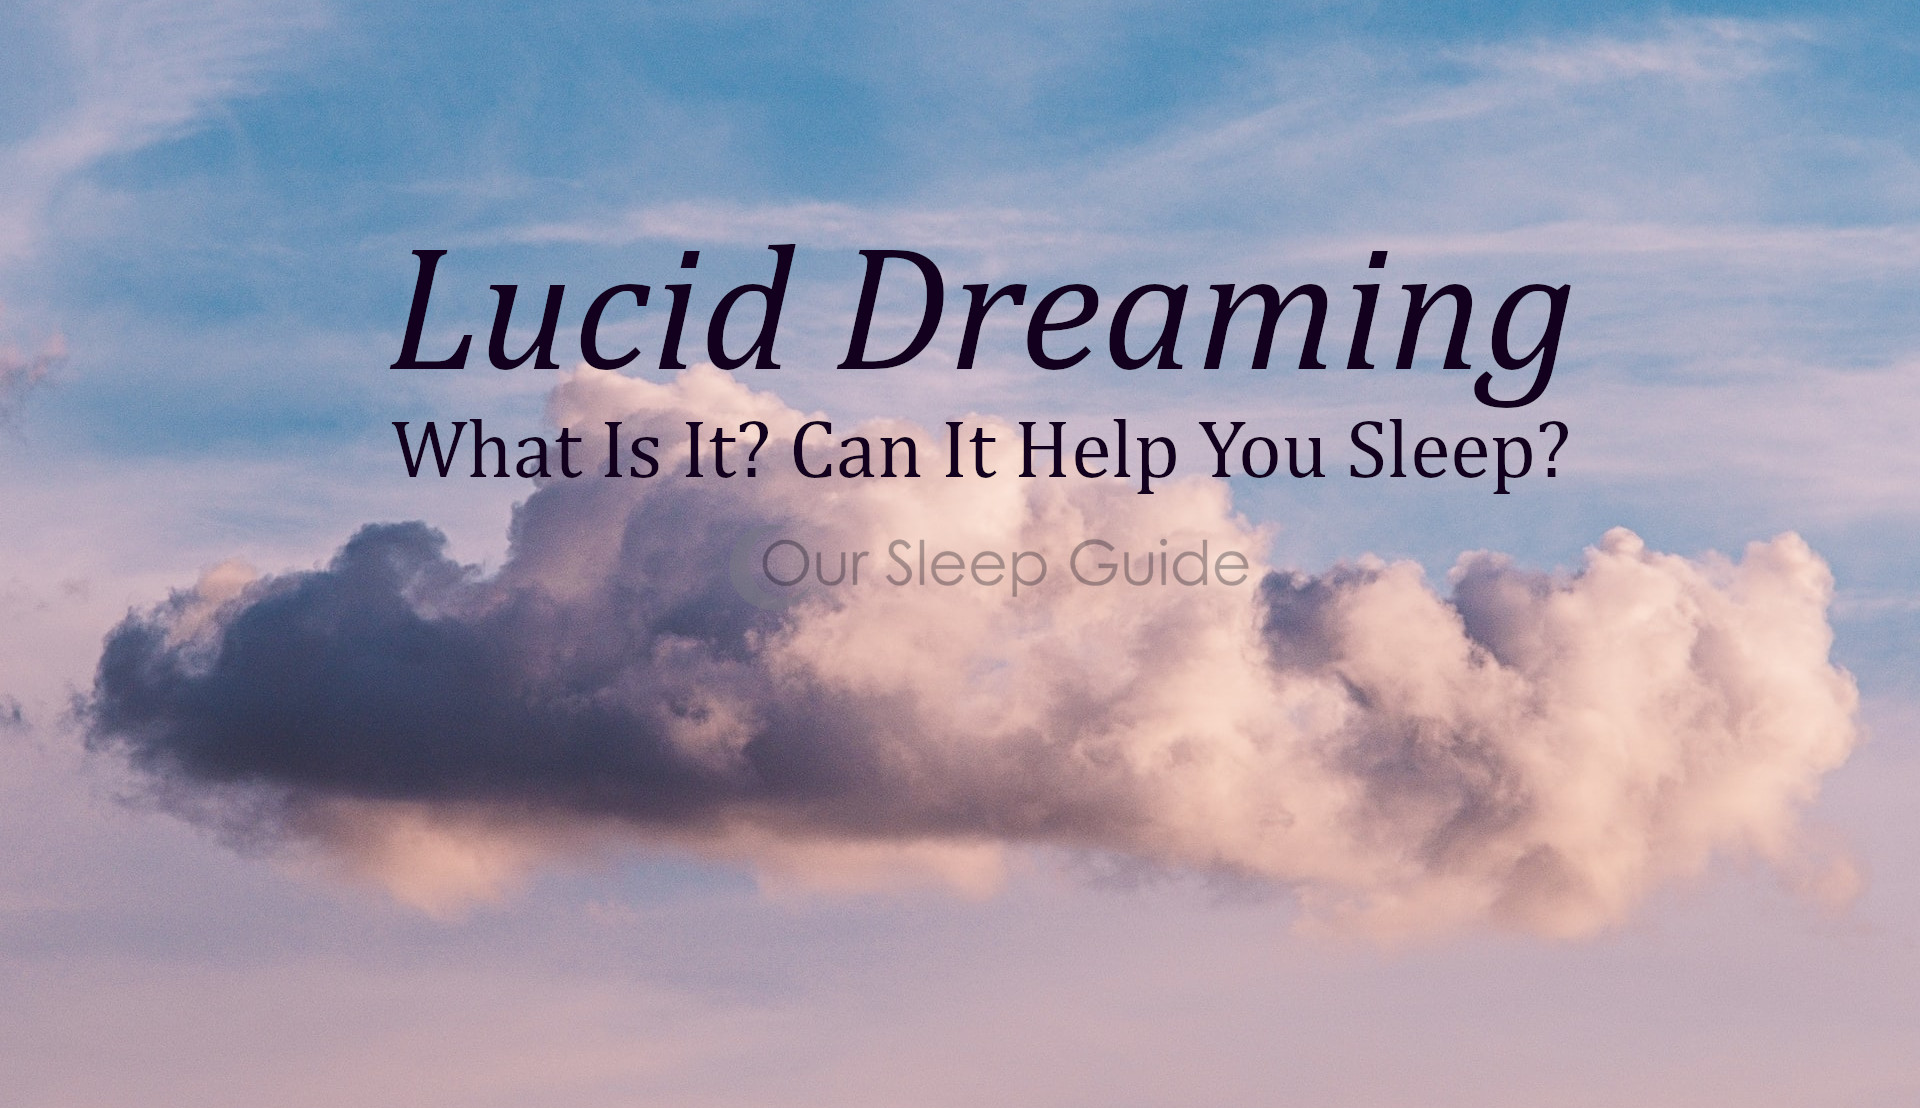 lucid dreaming is great for nightmares